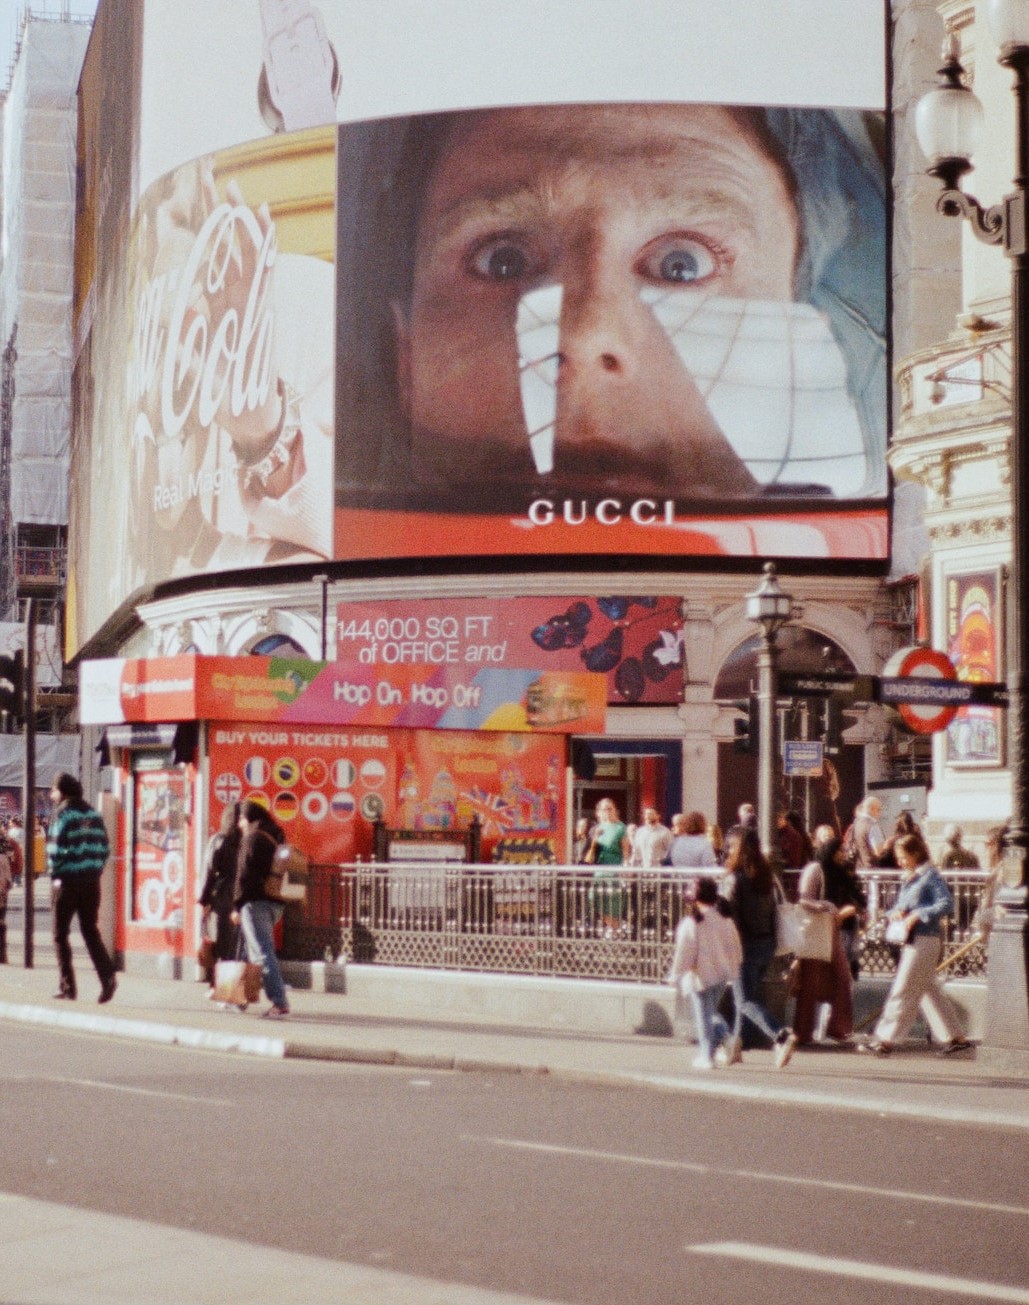 Big ad screens at Piccadilly Circus, London, advertising beauty brands